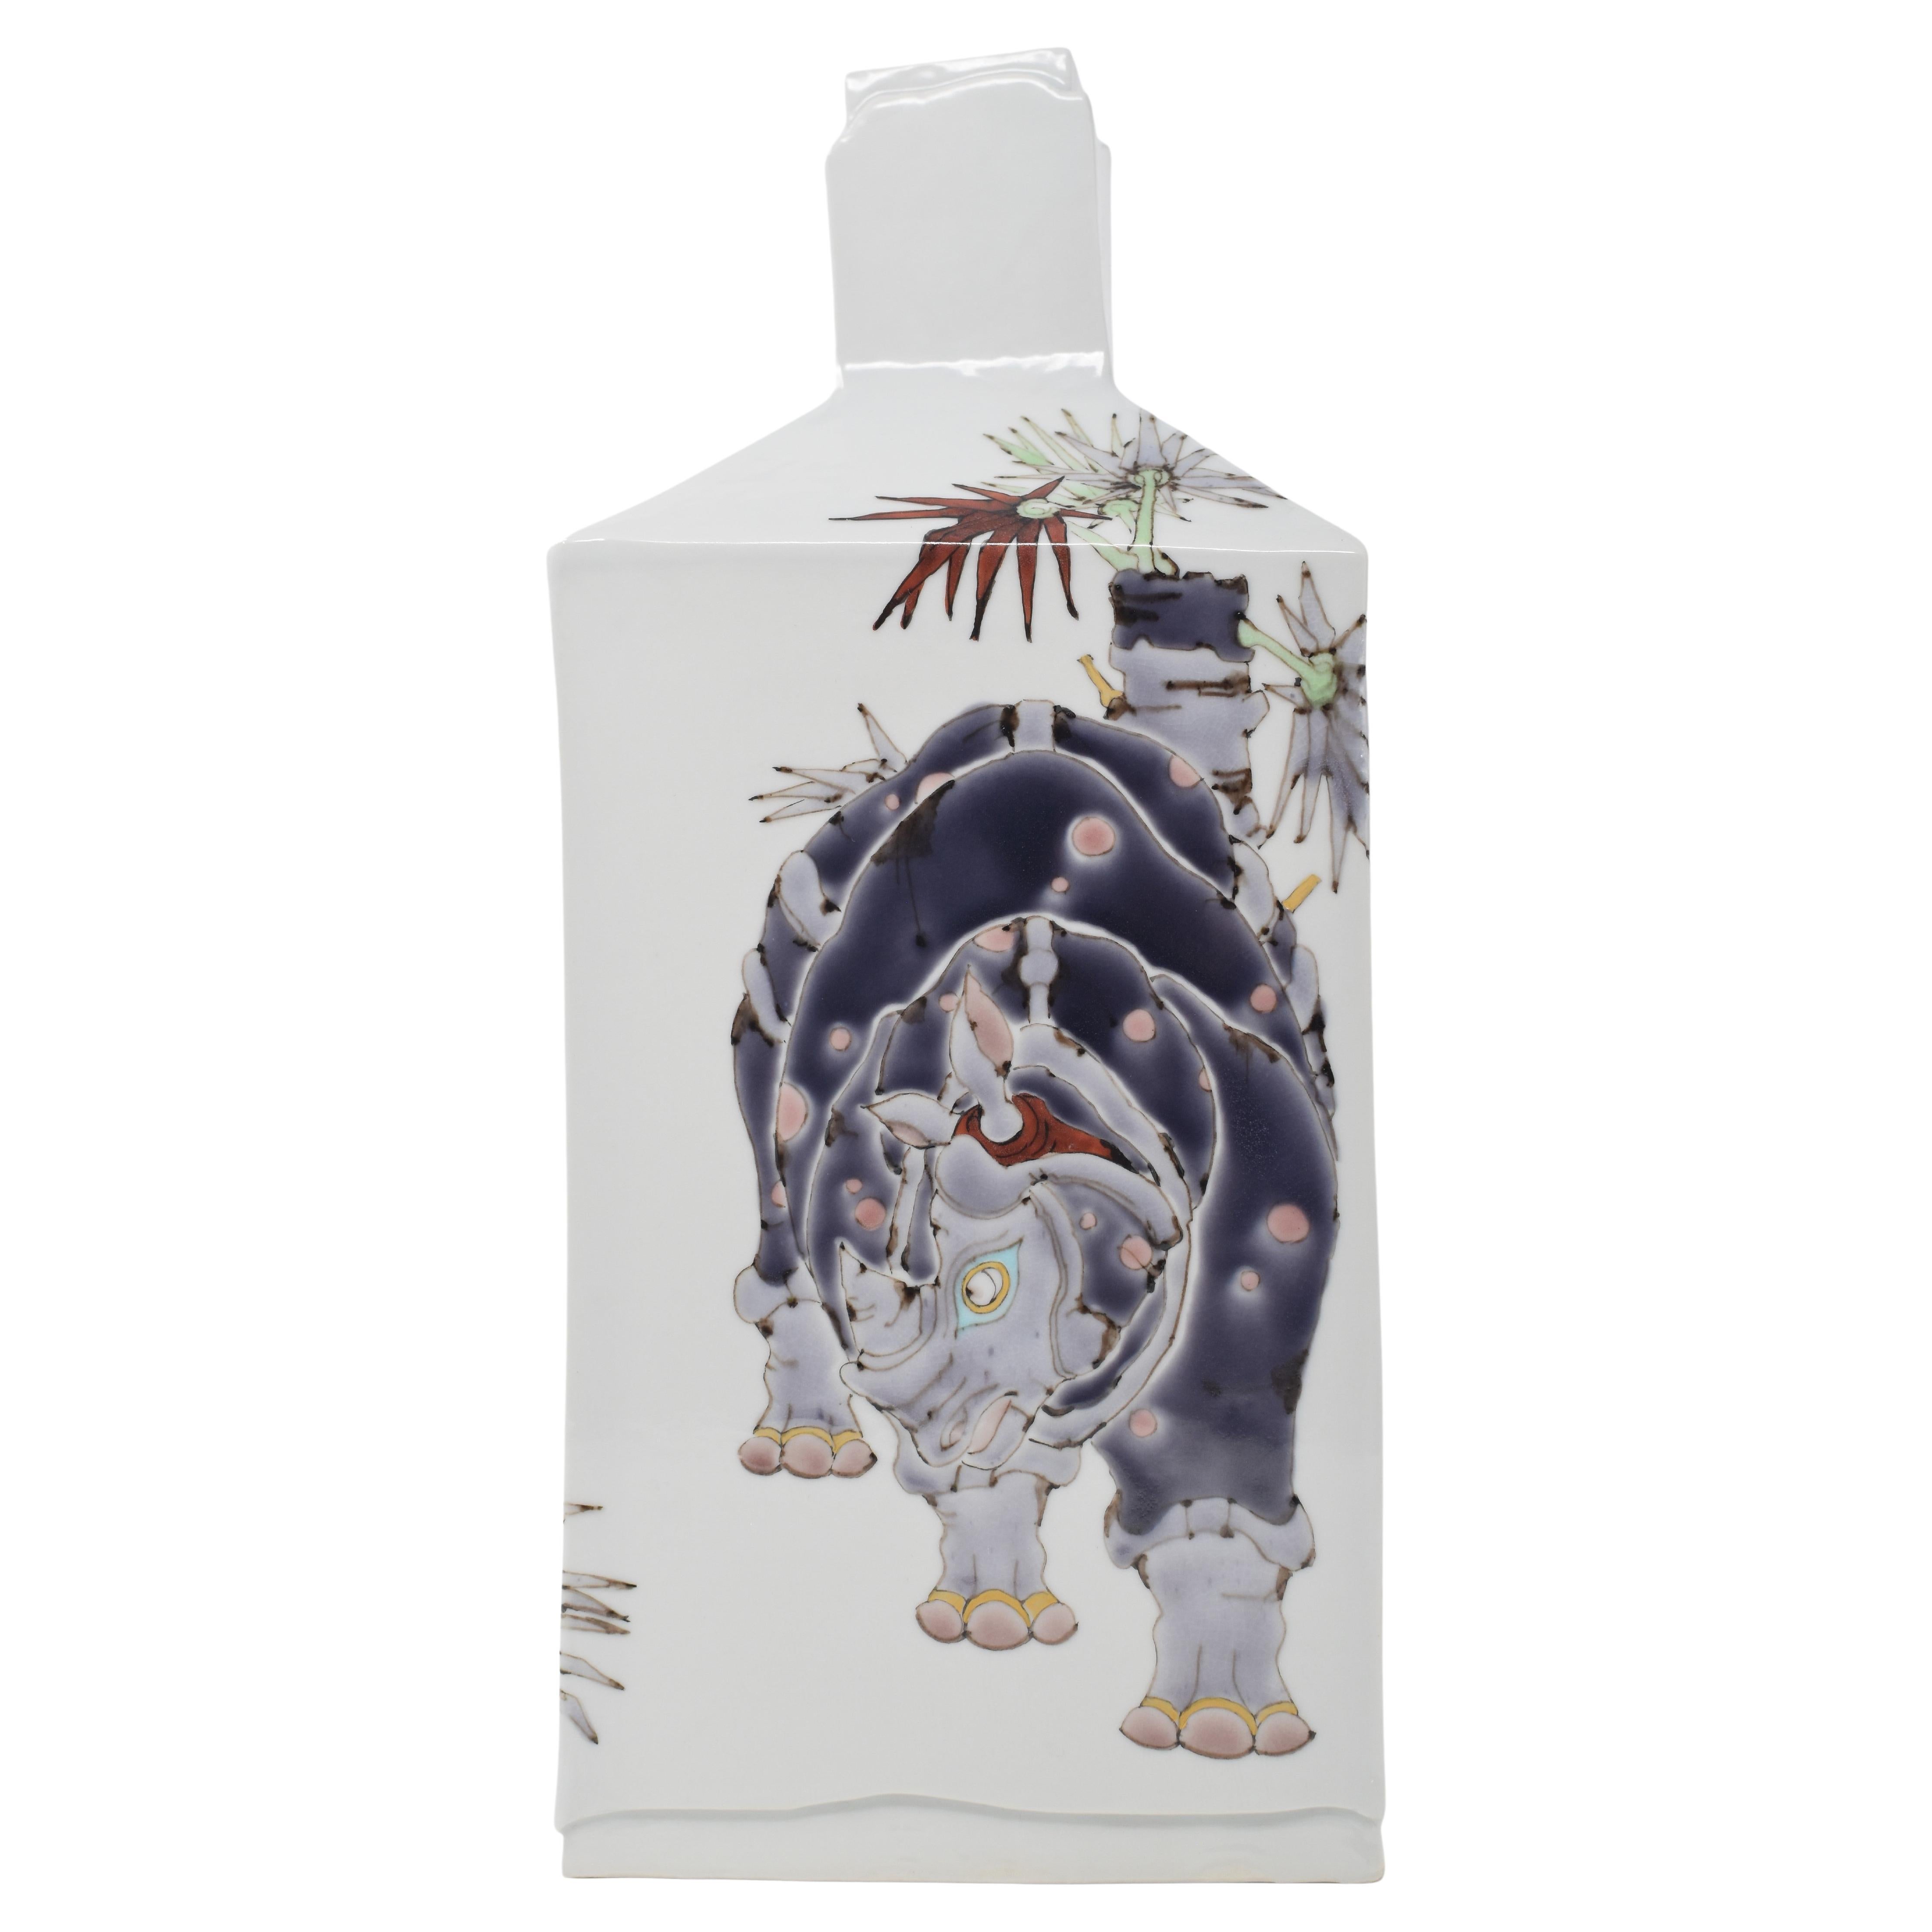 Extraordinary Japanese contemporary mueum quality decorative porcelain vase, stunningly hand painted in purple and red on a beautifully shaped rectangular body with a unique interpretation of the rhinoceros, a masterpiece by widely respected master